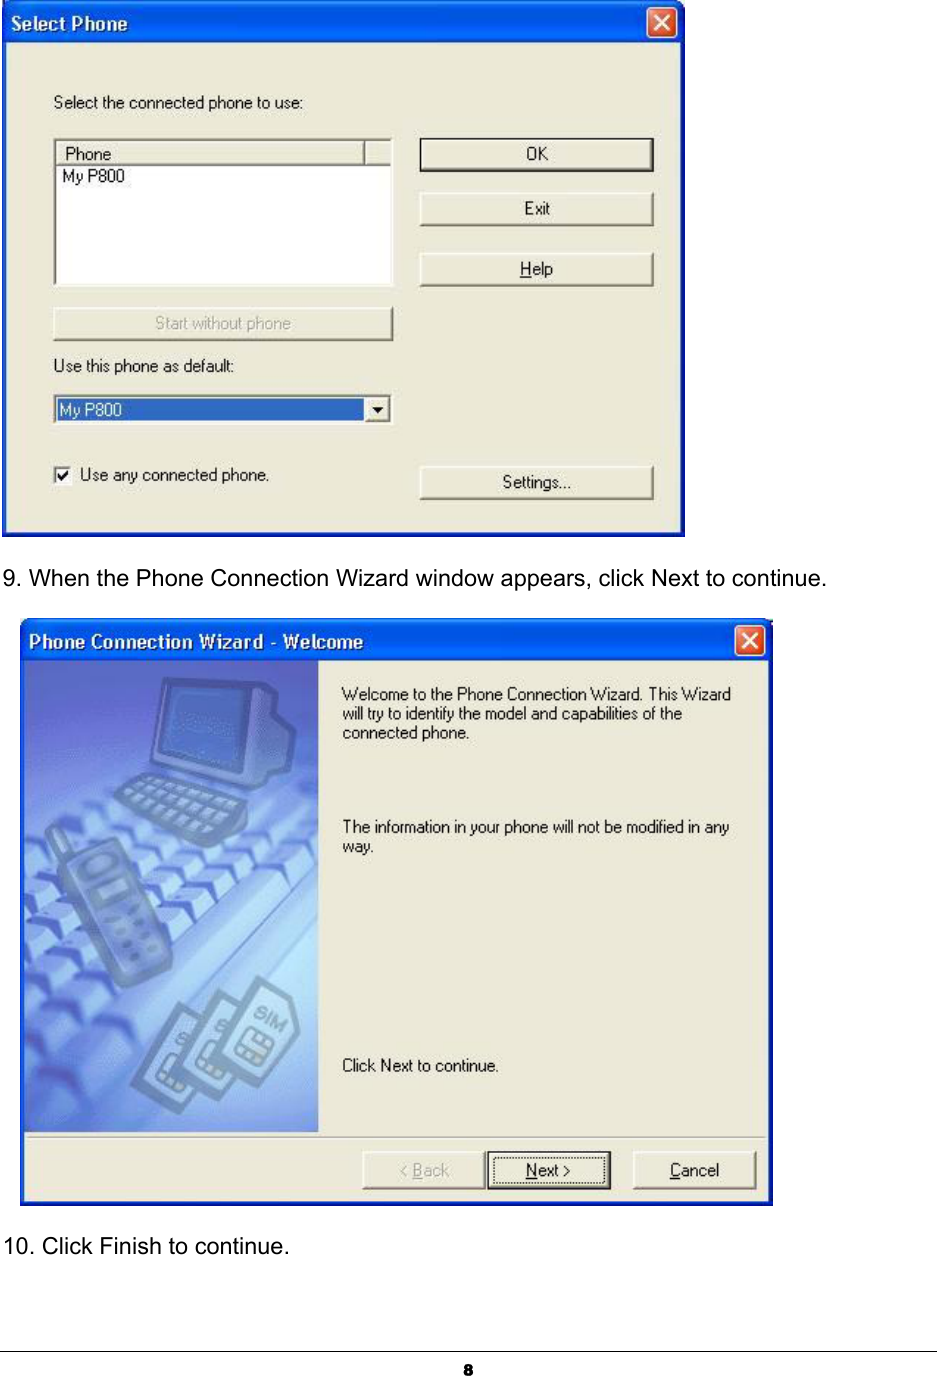  8 9. When the Phone Connection Wizard window appears, click Next to continue.     10. Click Finish to continue. 